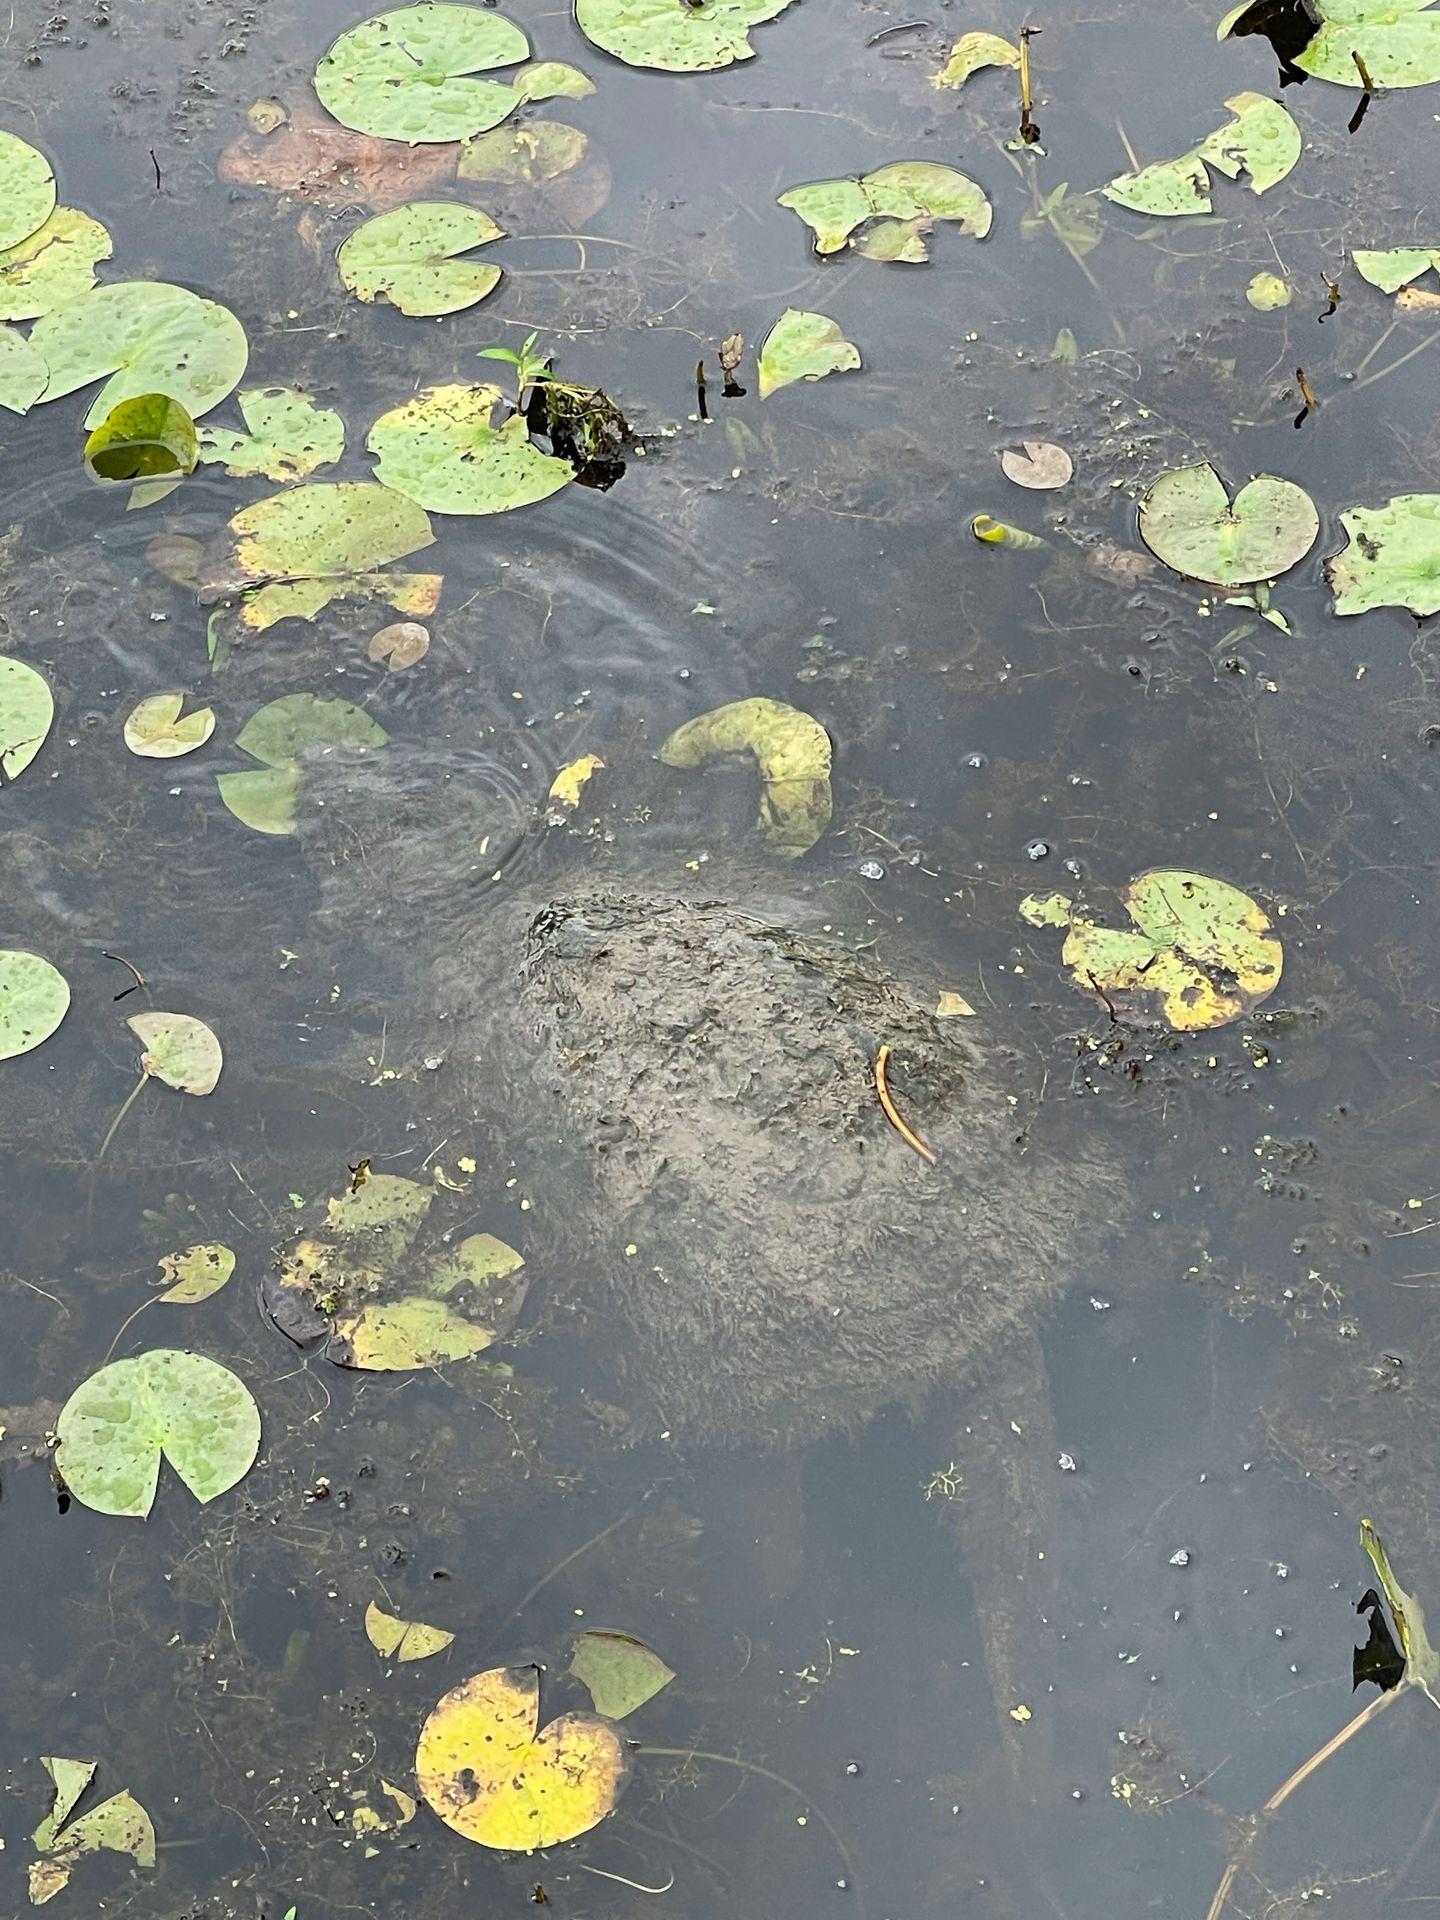 A snapping turtle under the surface of the water eating a leave.